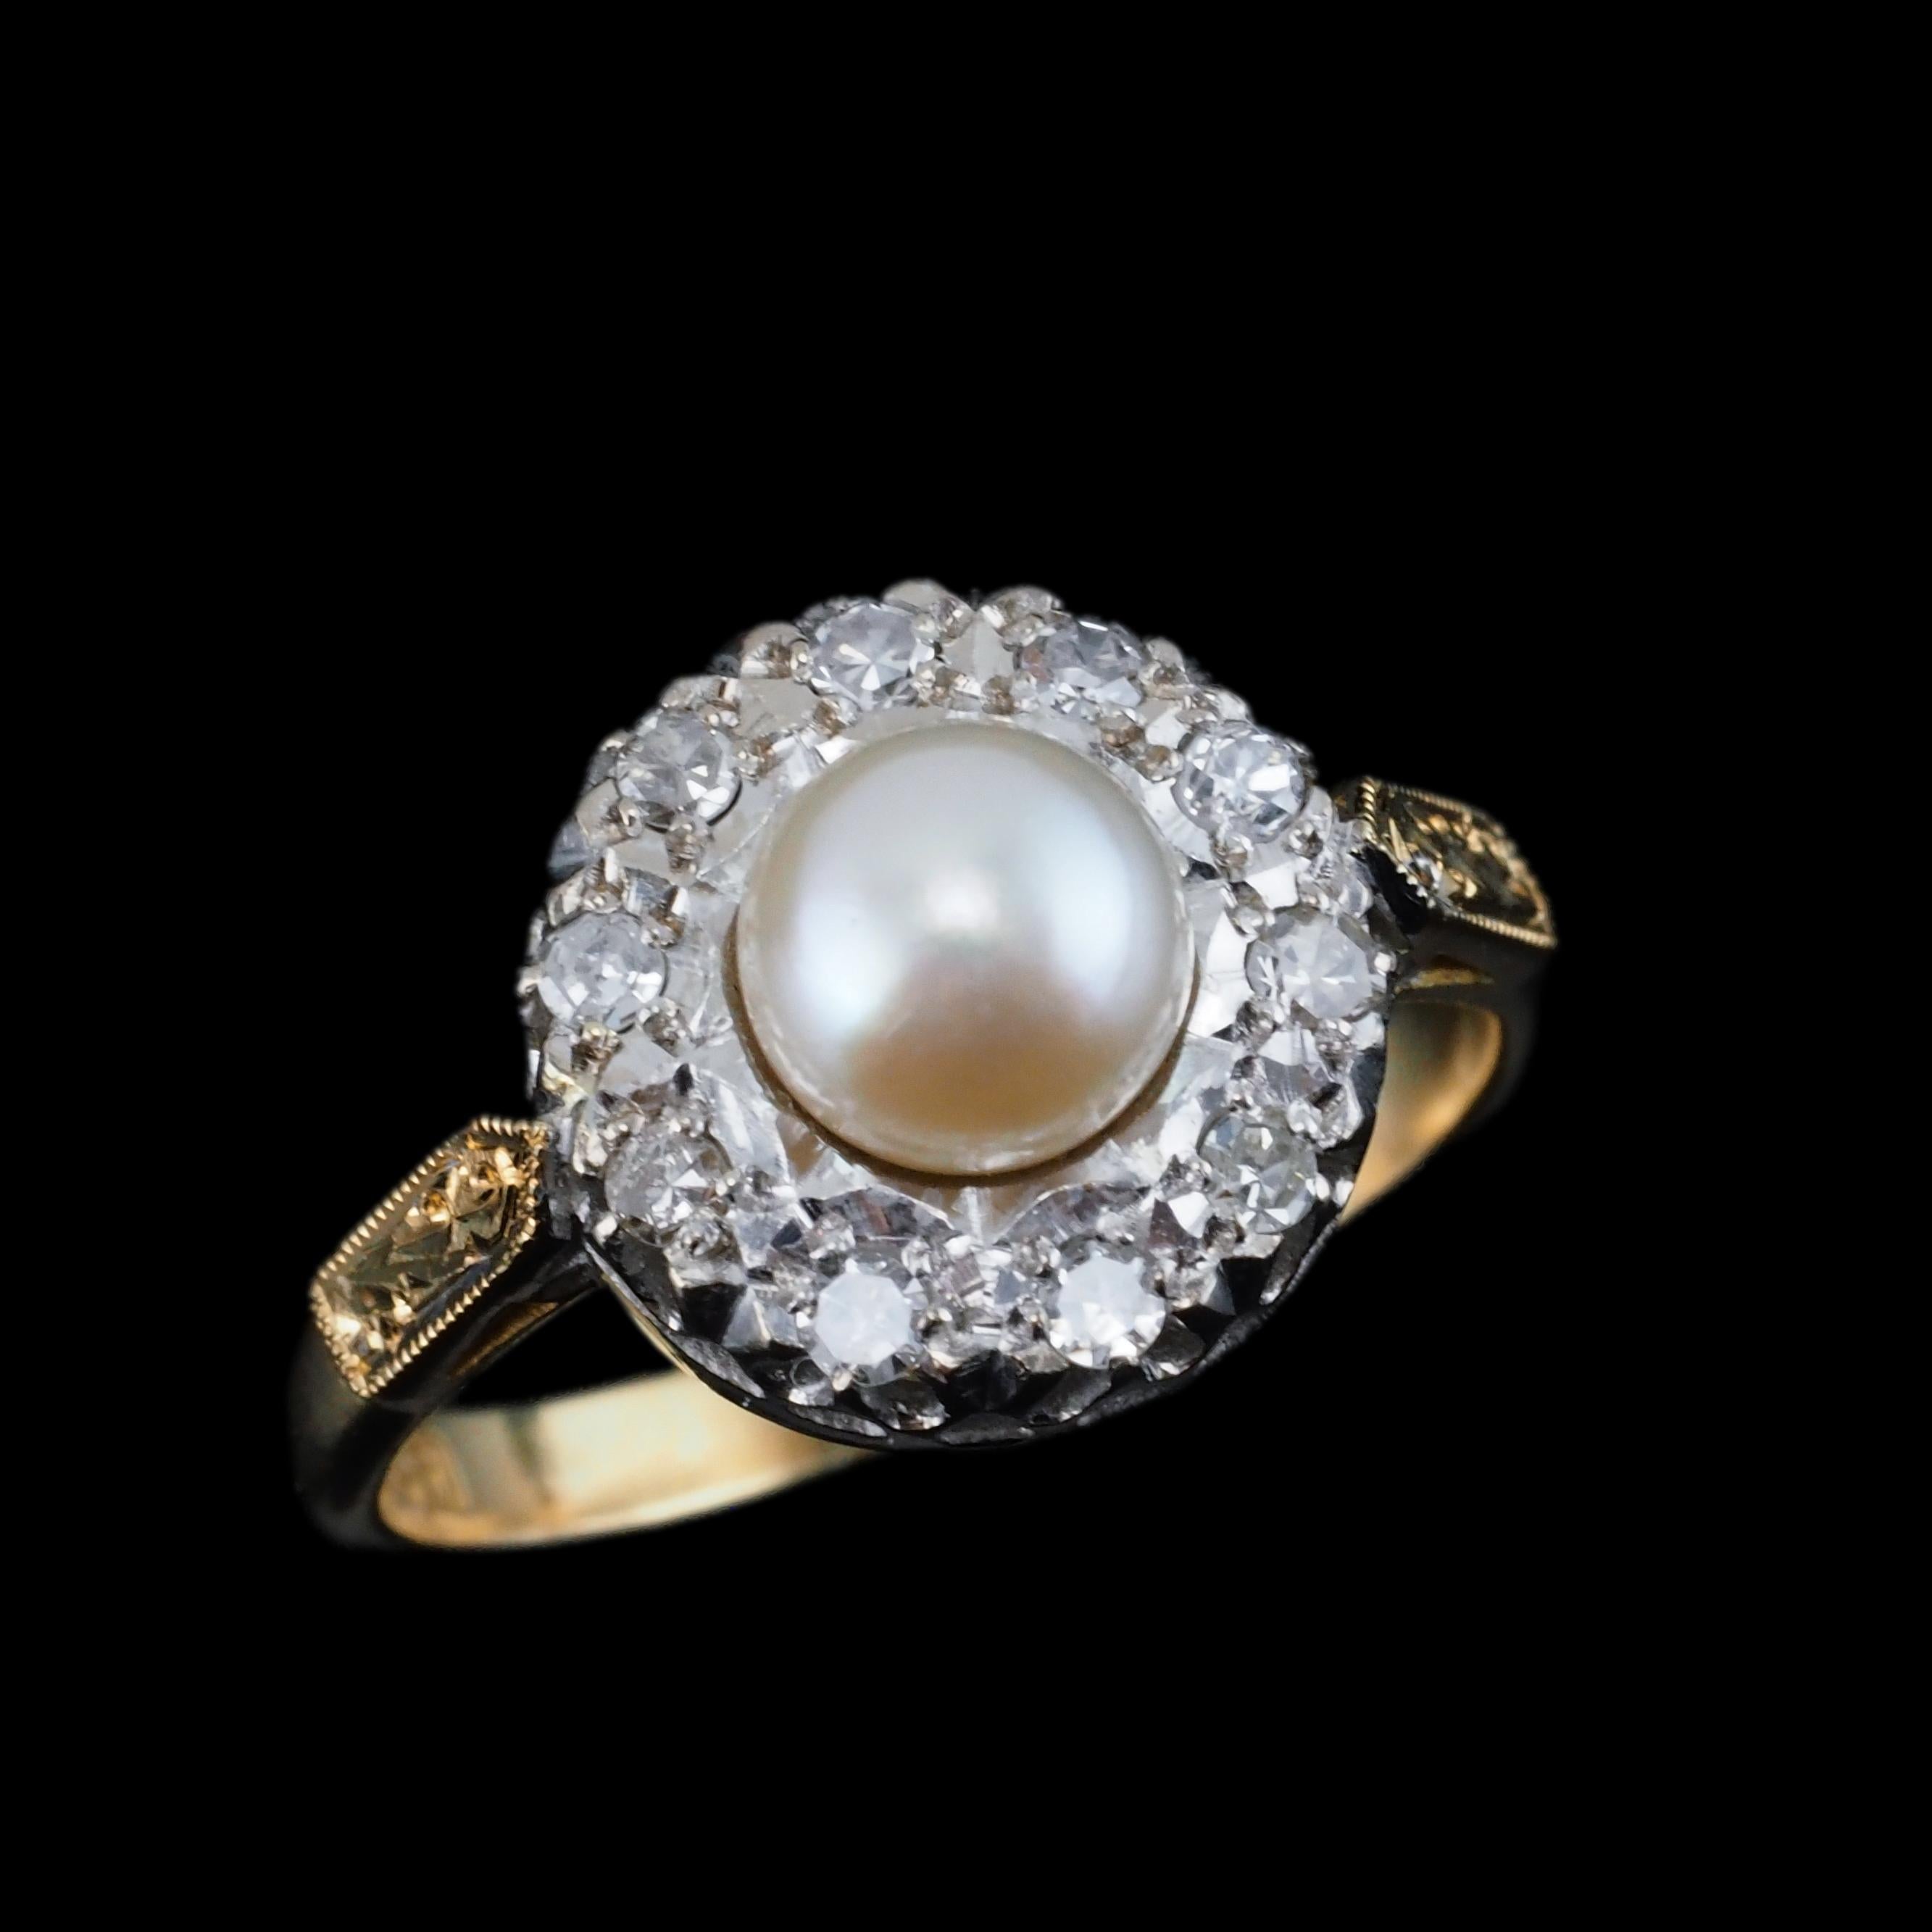 18K Gold Antique Pearl & Diamond Cluster Ring - c.1900s 6